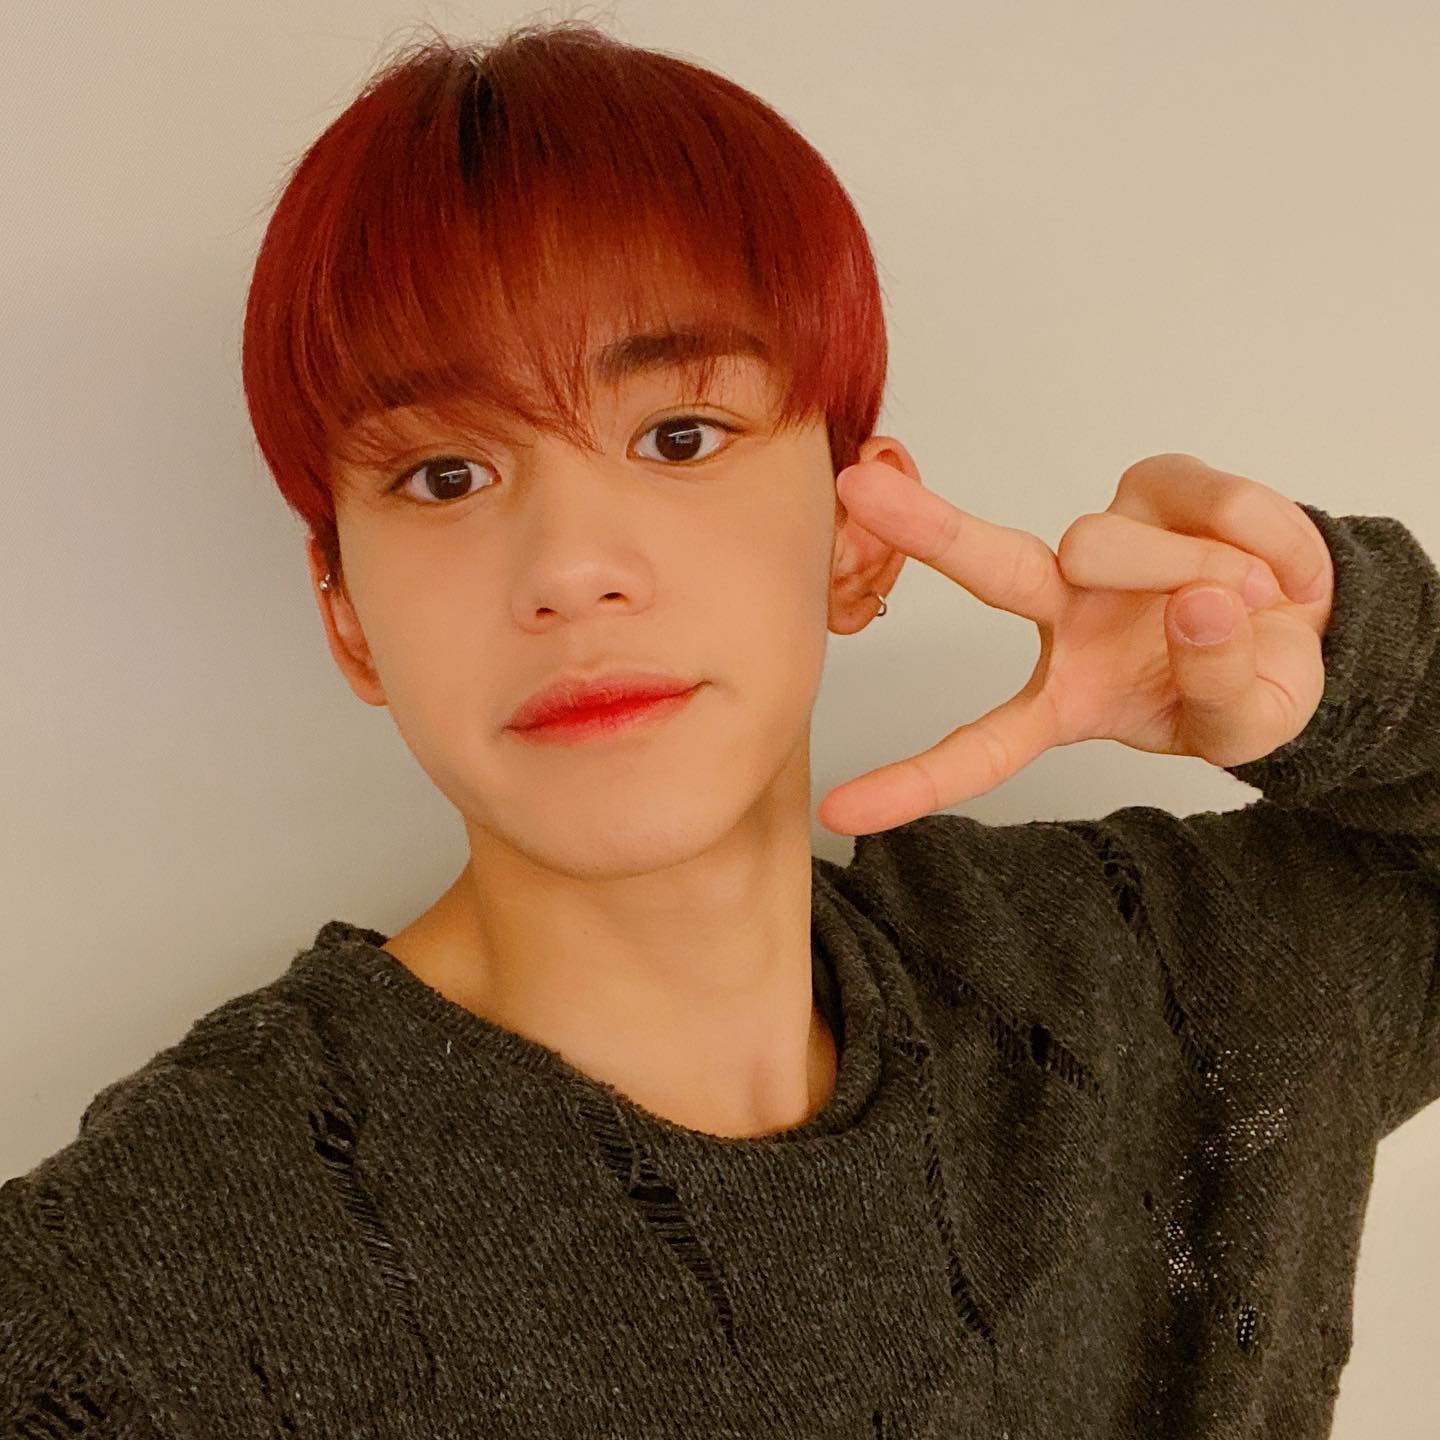 Why Did LUCAS Leave NCT? He Apologized For 'Wrong' & 'Irresponsible'  Behavior